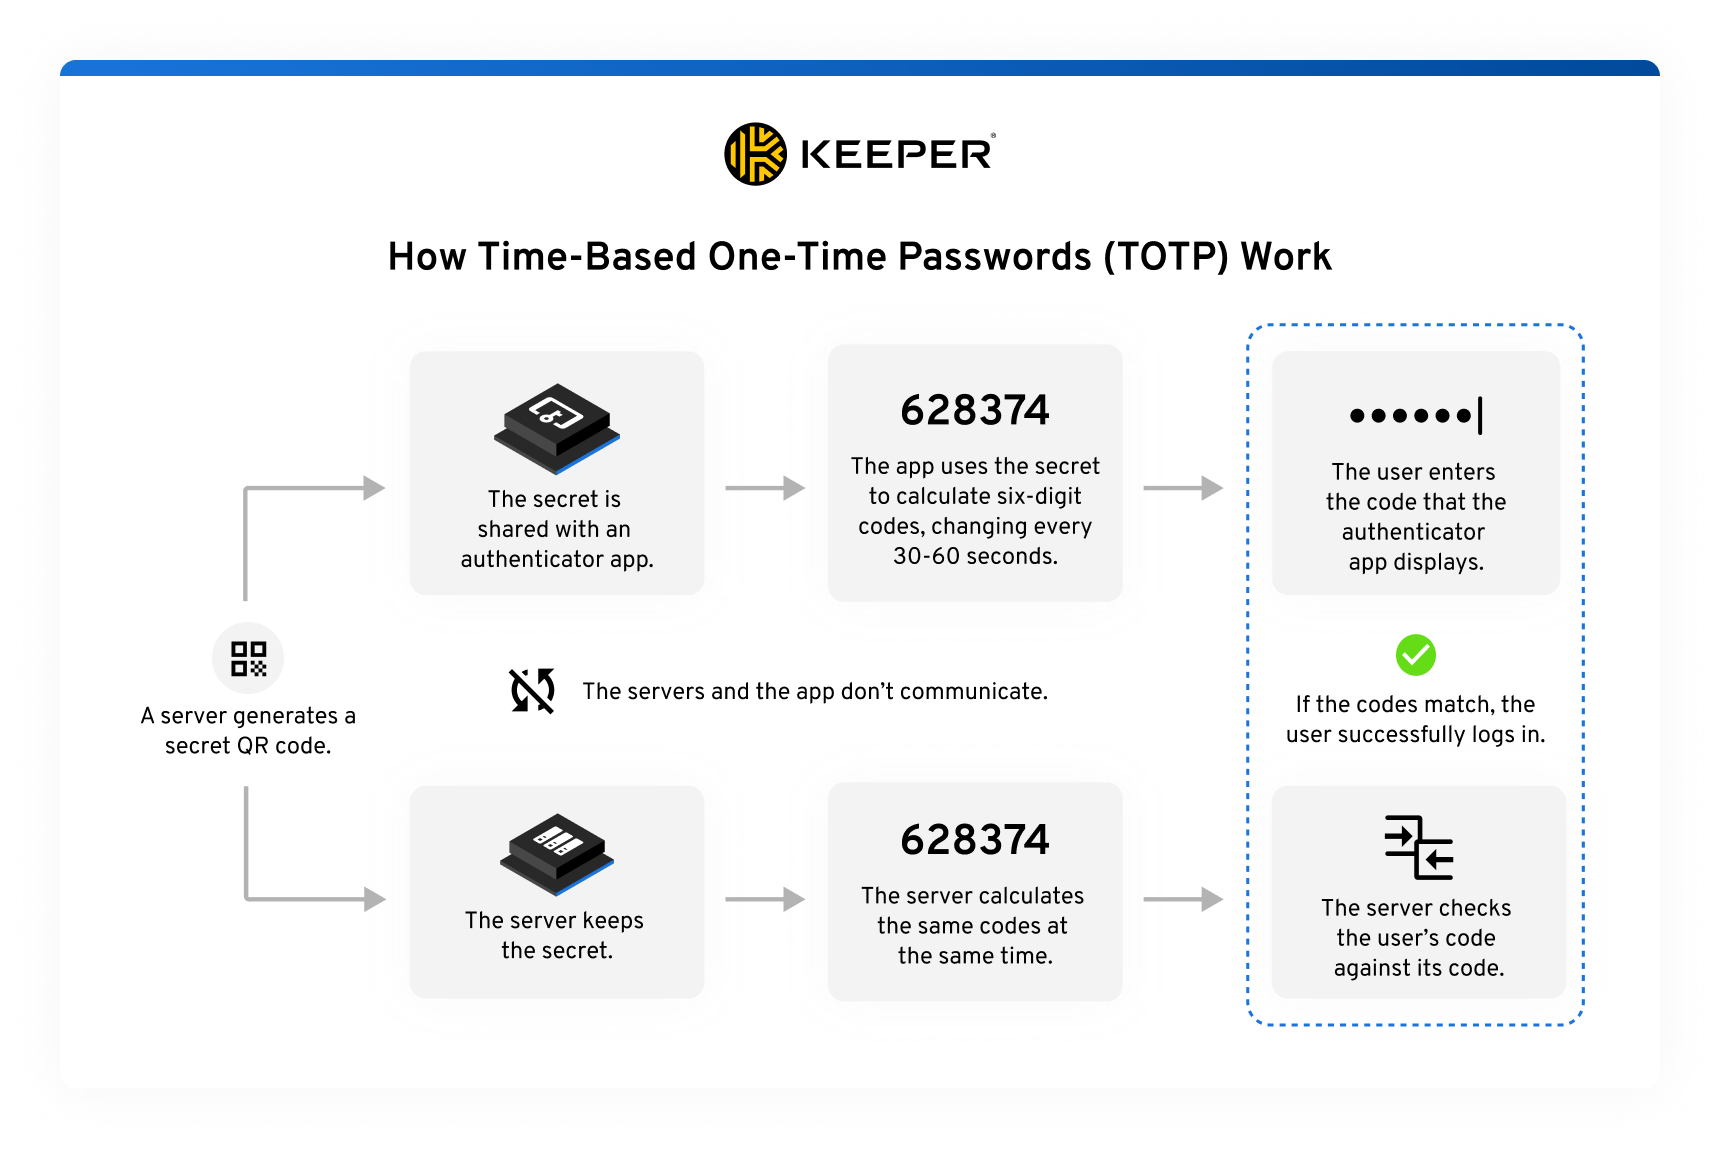 An illustration showing the process of how time-based one-time passwords (TOTP) work. It includes a QR code generated by a server displaying a temporary code, an authenticator app with which the secret is shared with, a six-digit code generated by the app and a symbol to convey the idea of enhanced authentication.